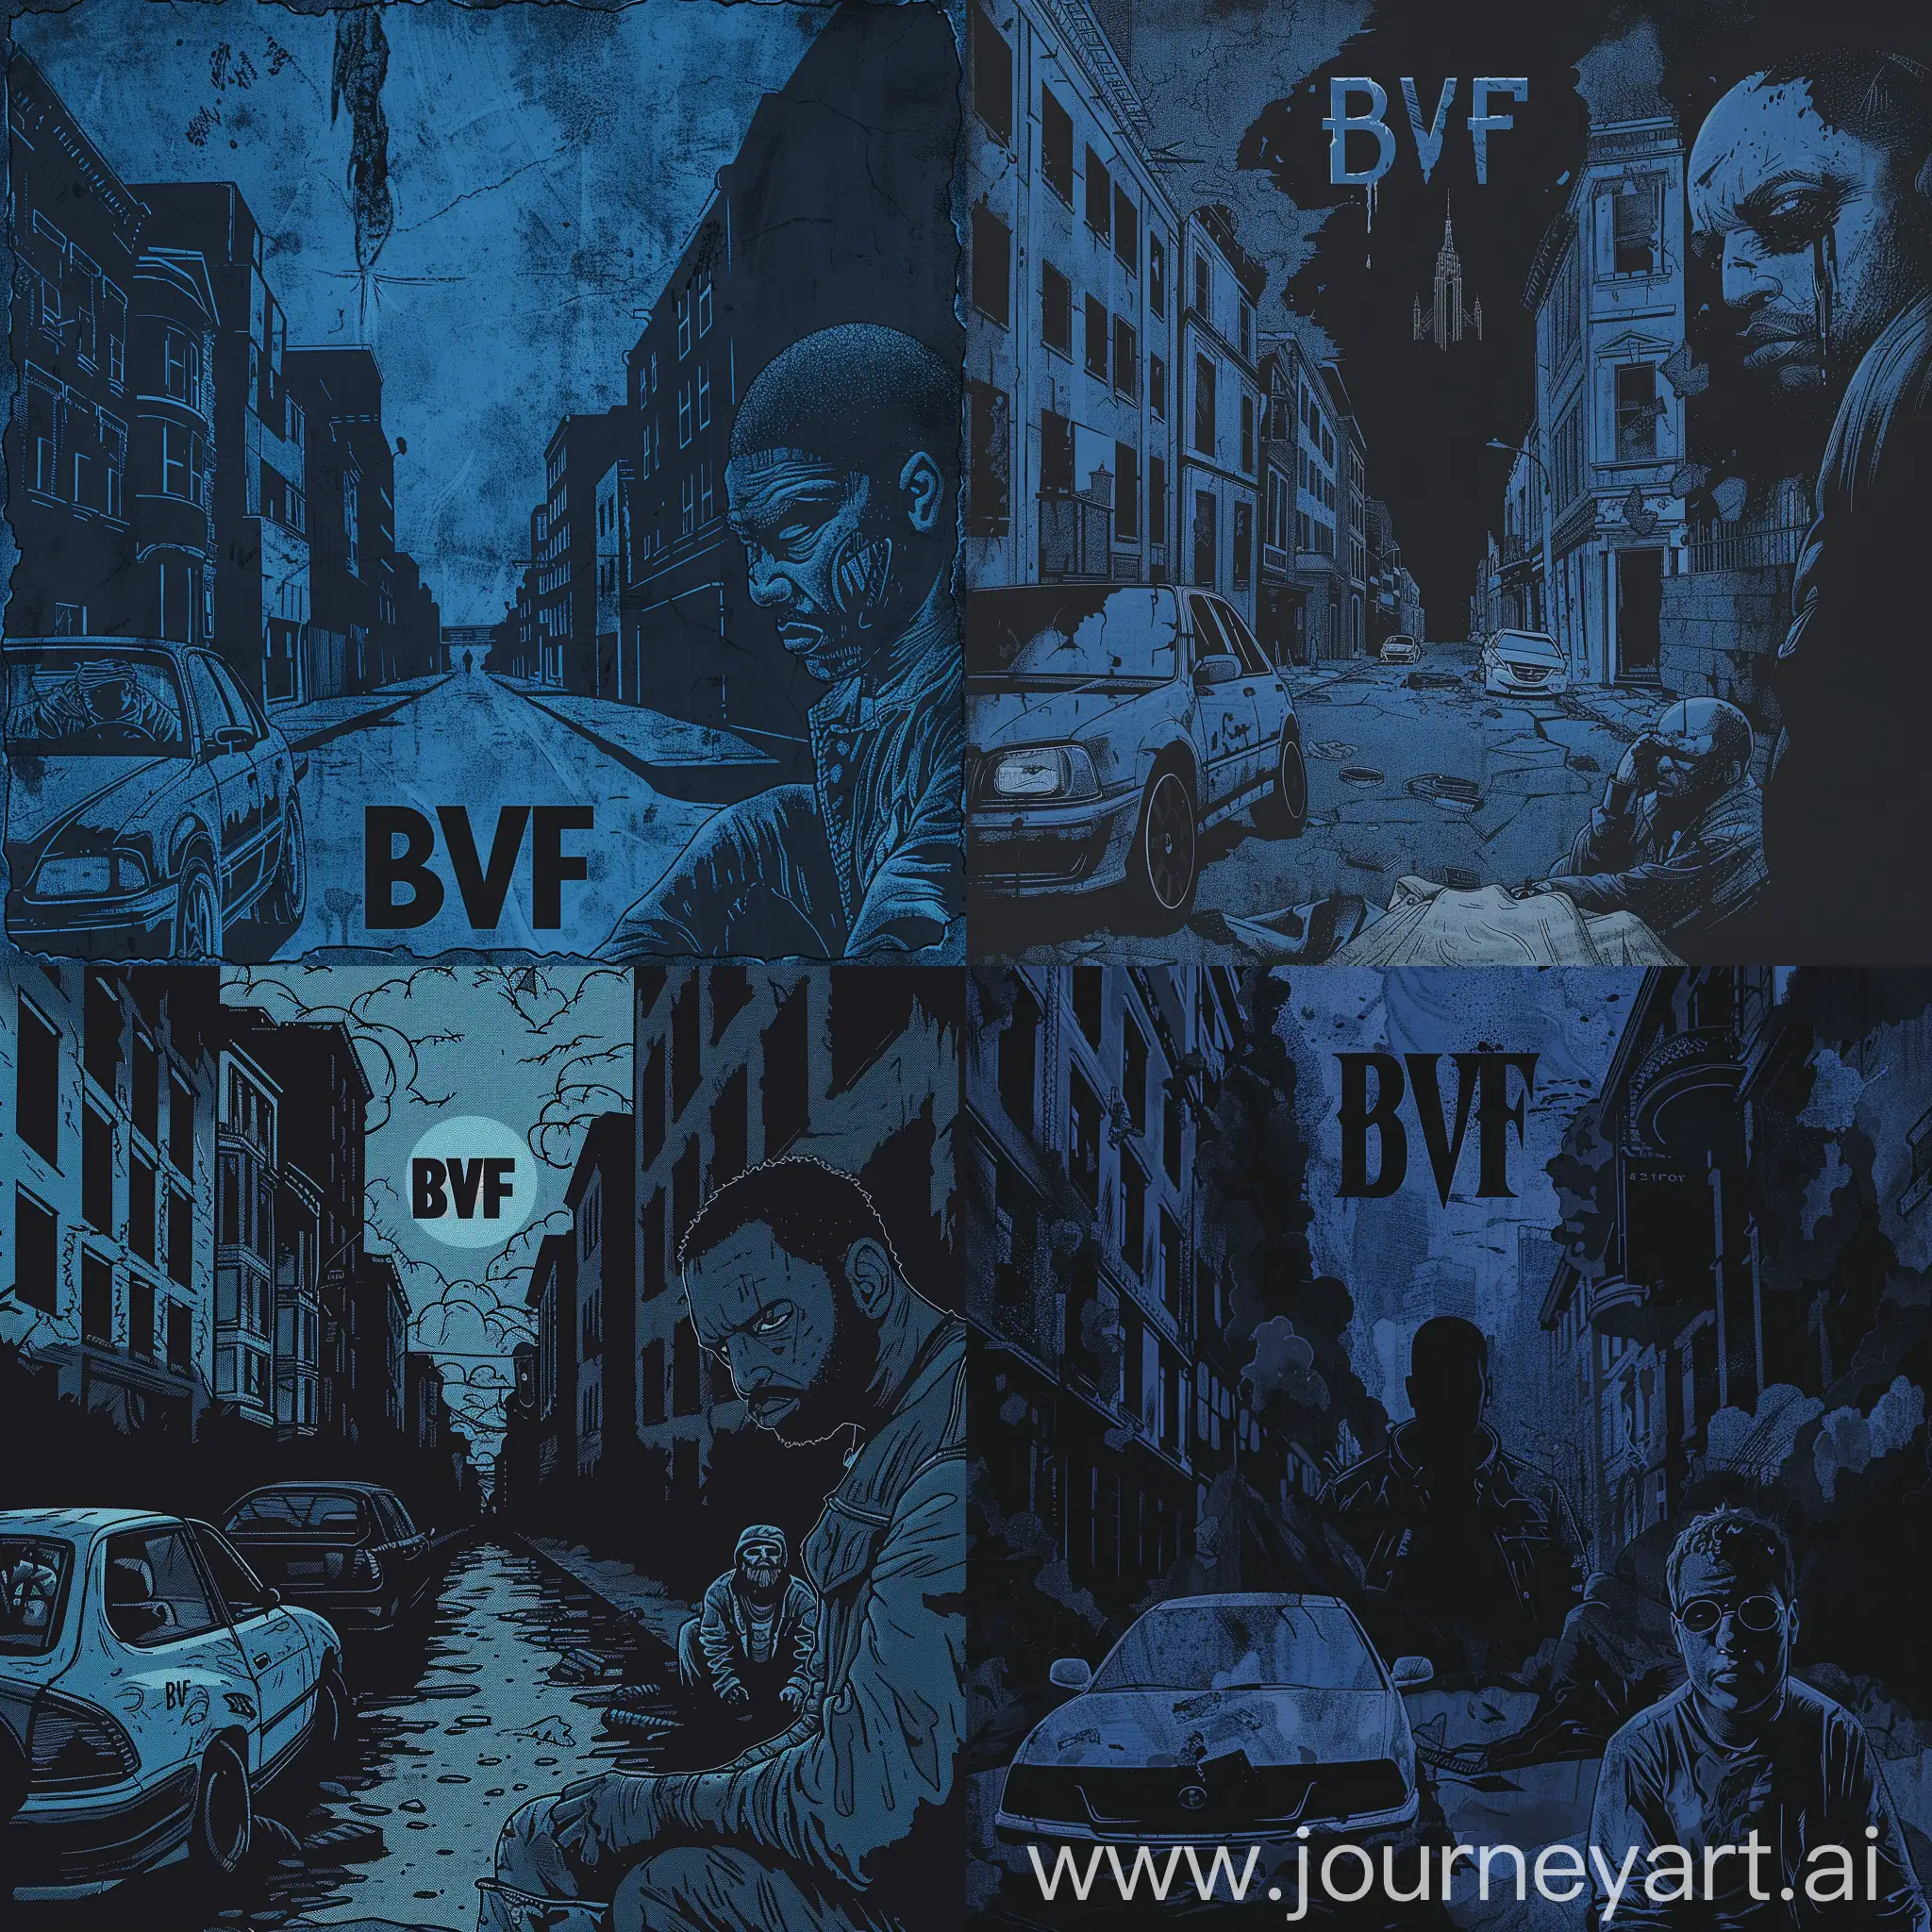 GothicStyle-Rap-Album-Cover-Dark-Blue-Theme-with-BVF-Inscription-Car-and-Homeless-Figure